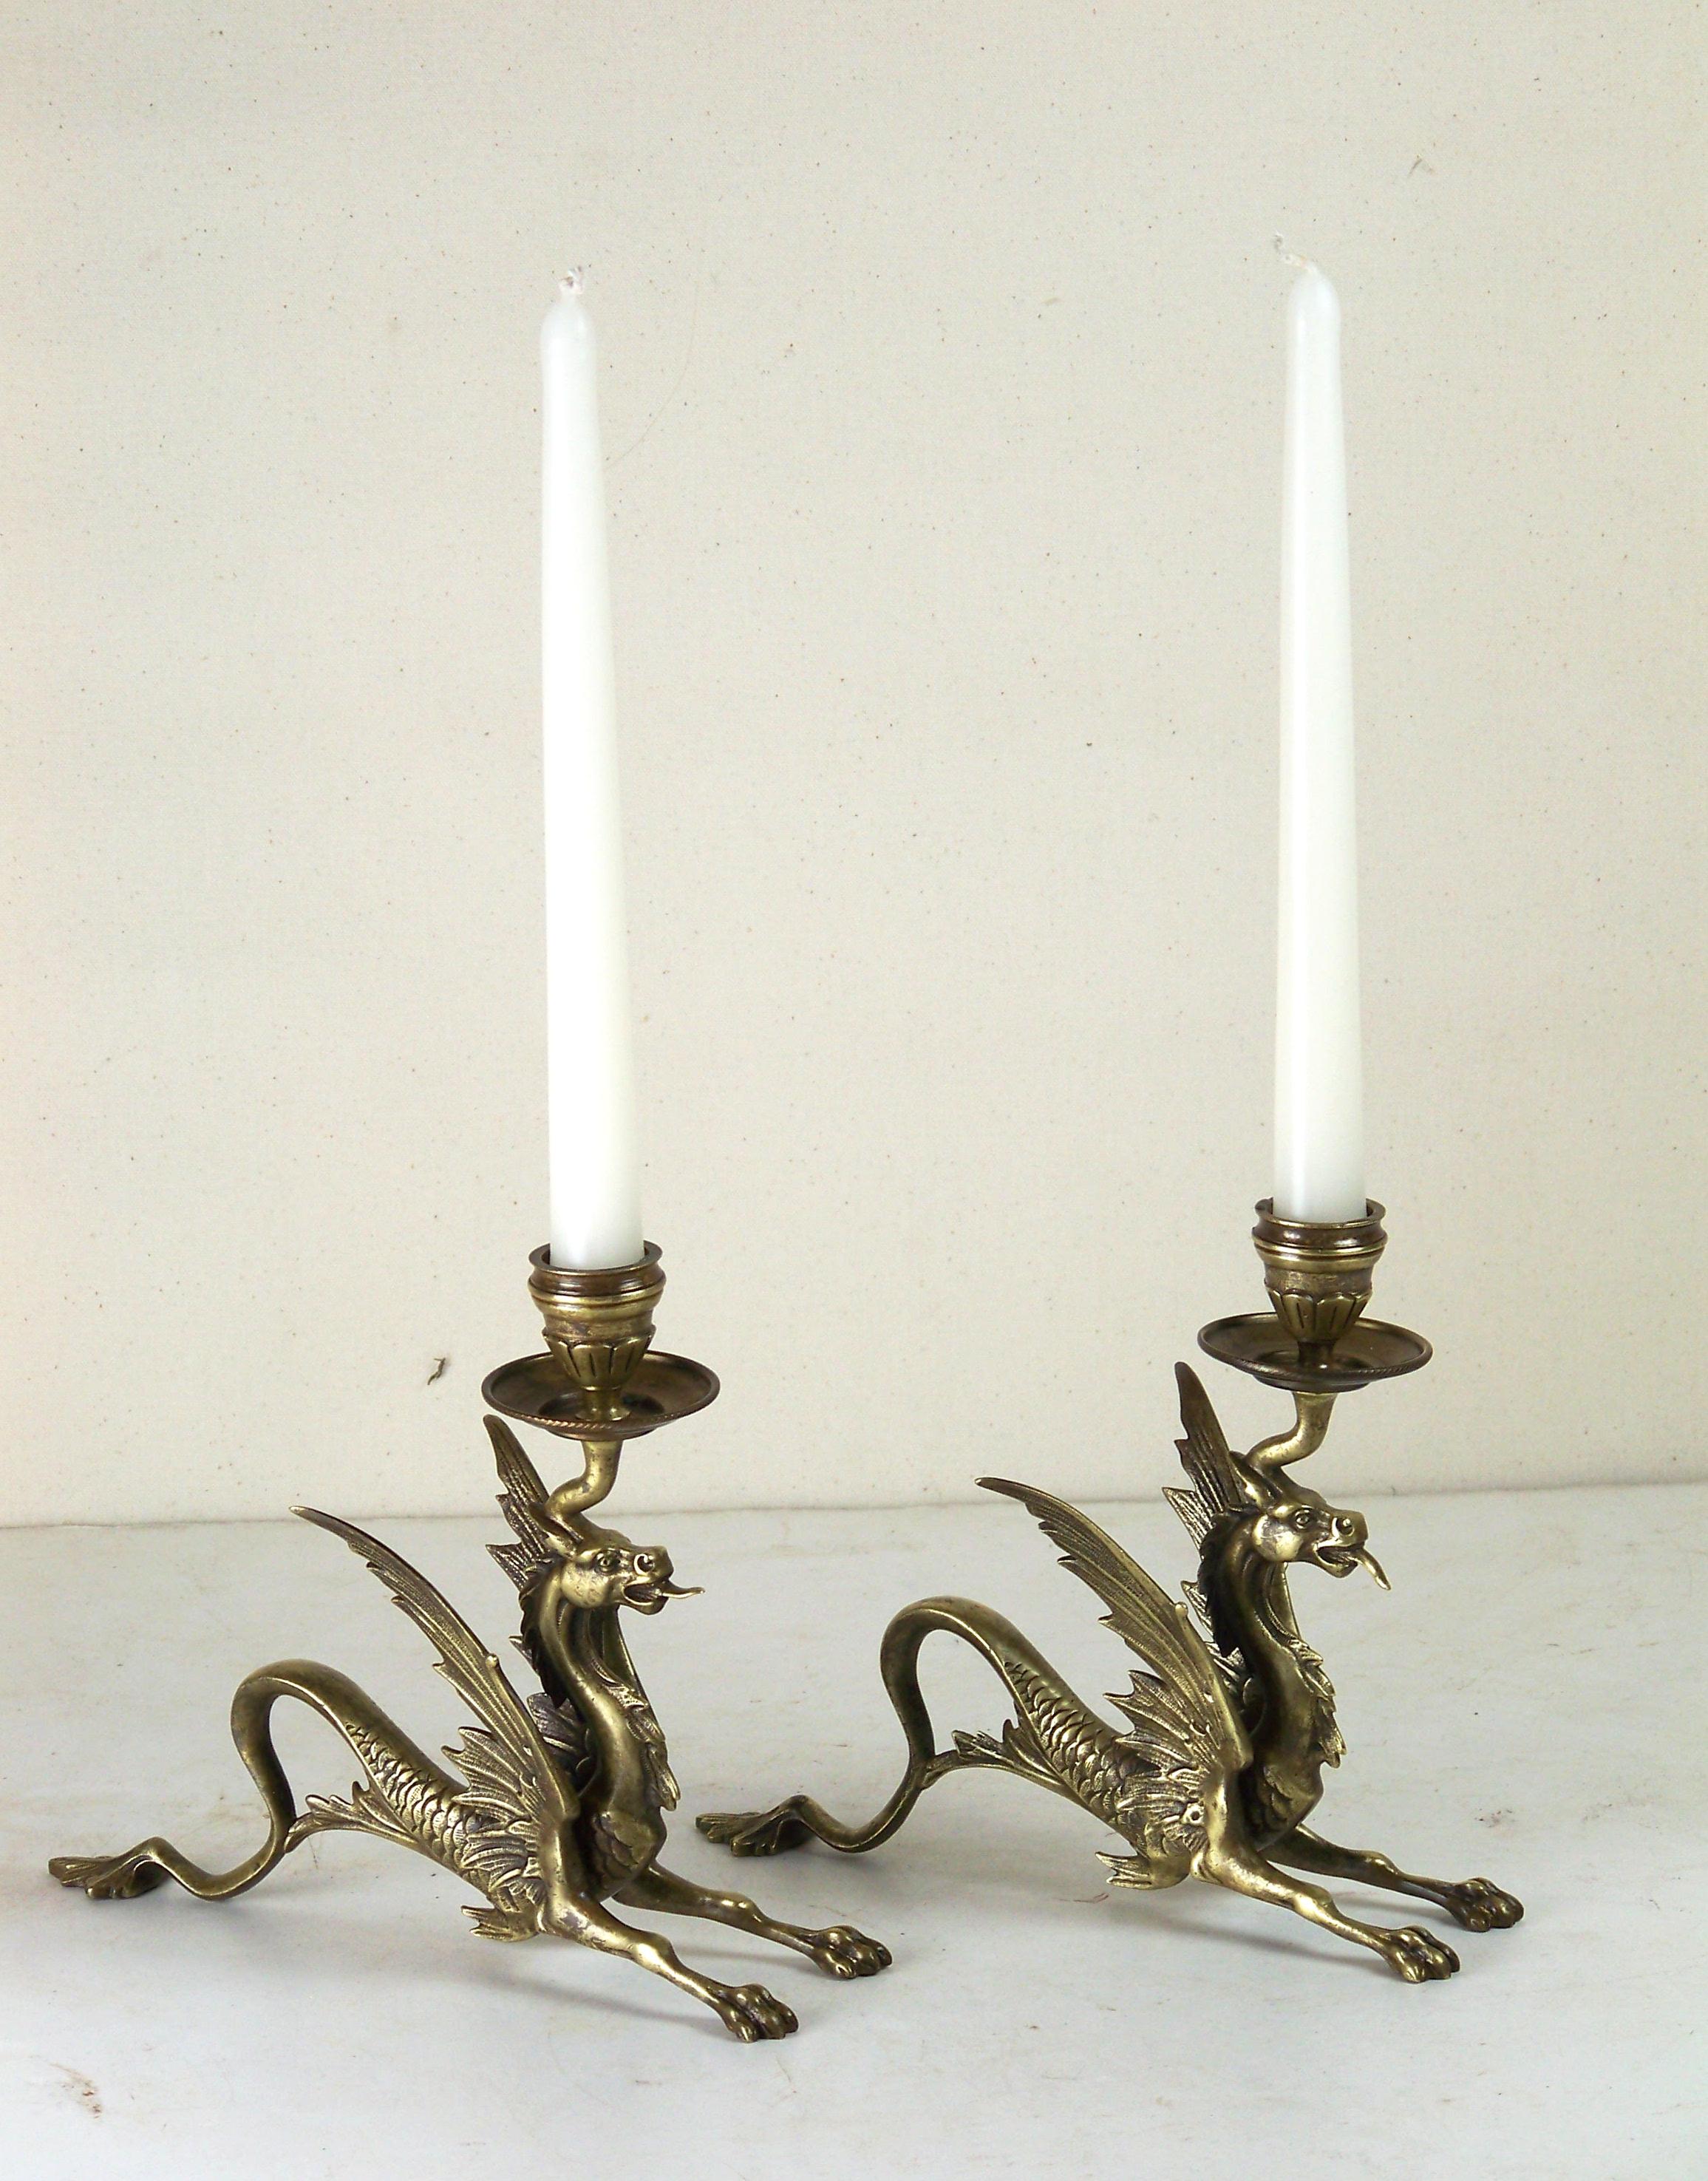 Neo-Renaissance brass candlesticks (second half of the 19th century). Candlesticks depict the Hippocampus. A Greek mythological monster, a mythical animal in the form of a seahorse that has the front half of a horse's body and the back half of a